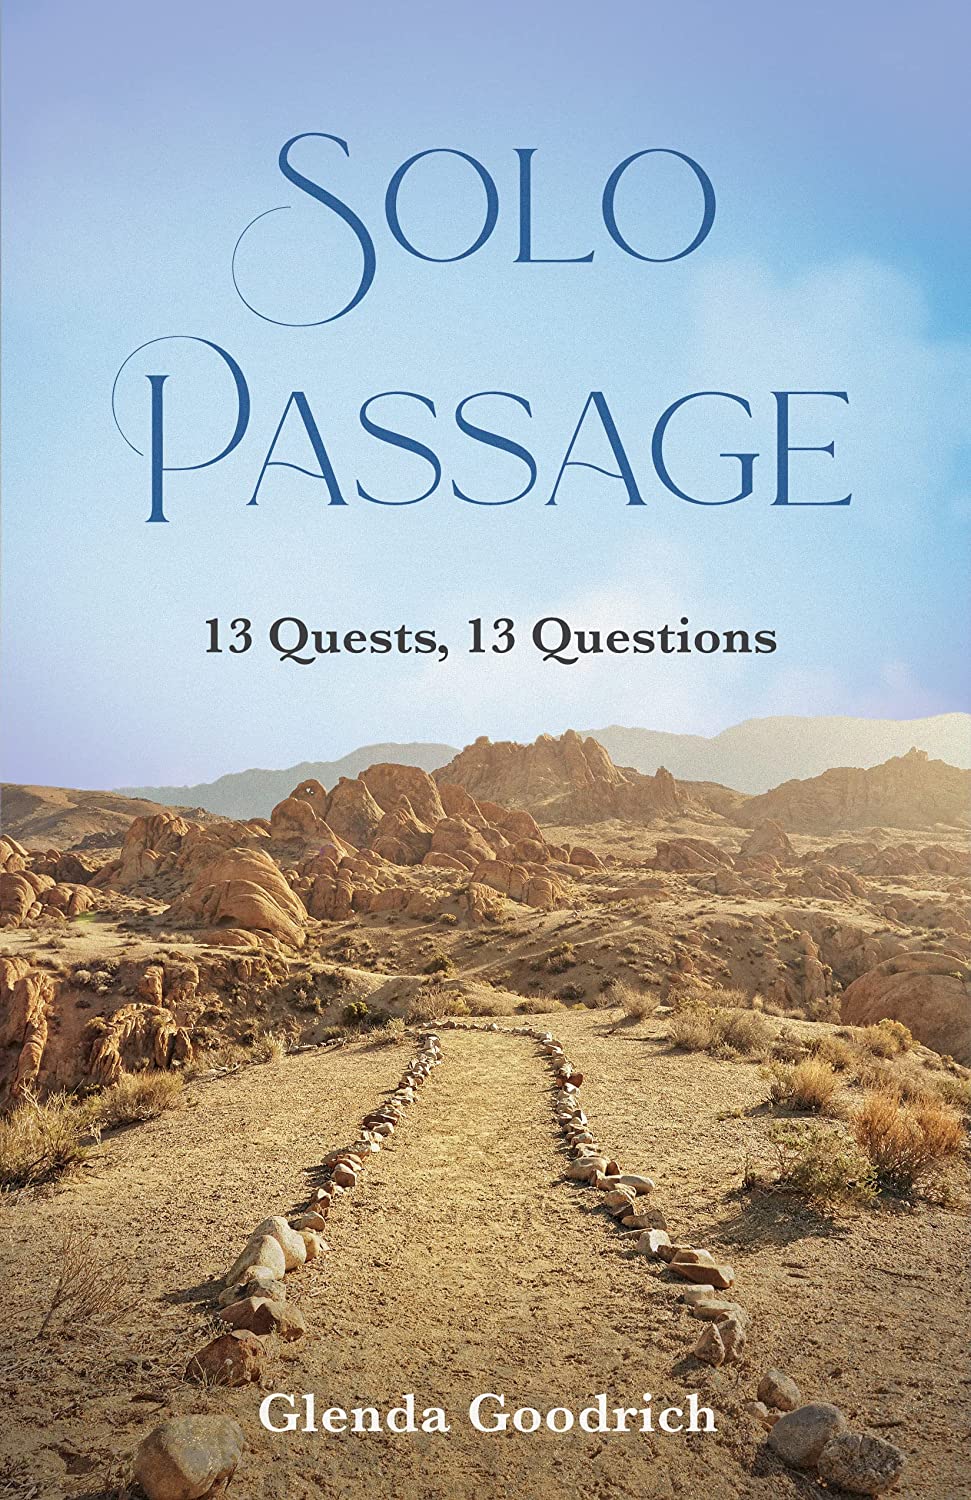 Solo Passage: 13 Quests, 13 Questions by Glenda Goodrich